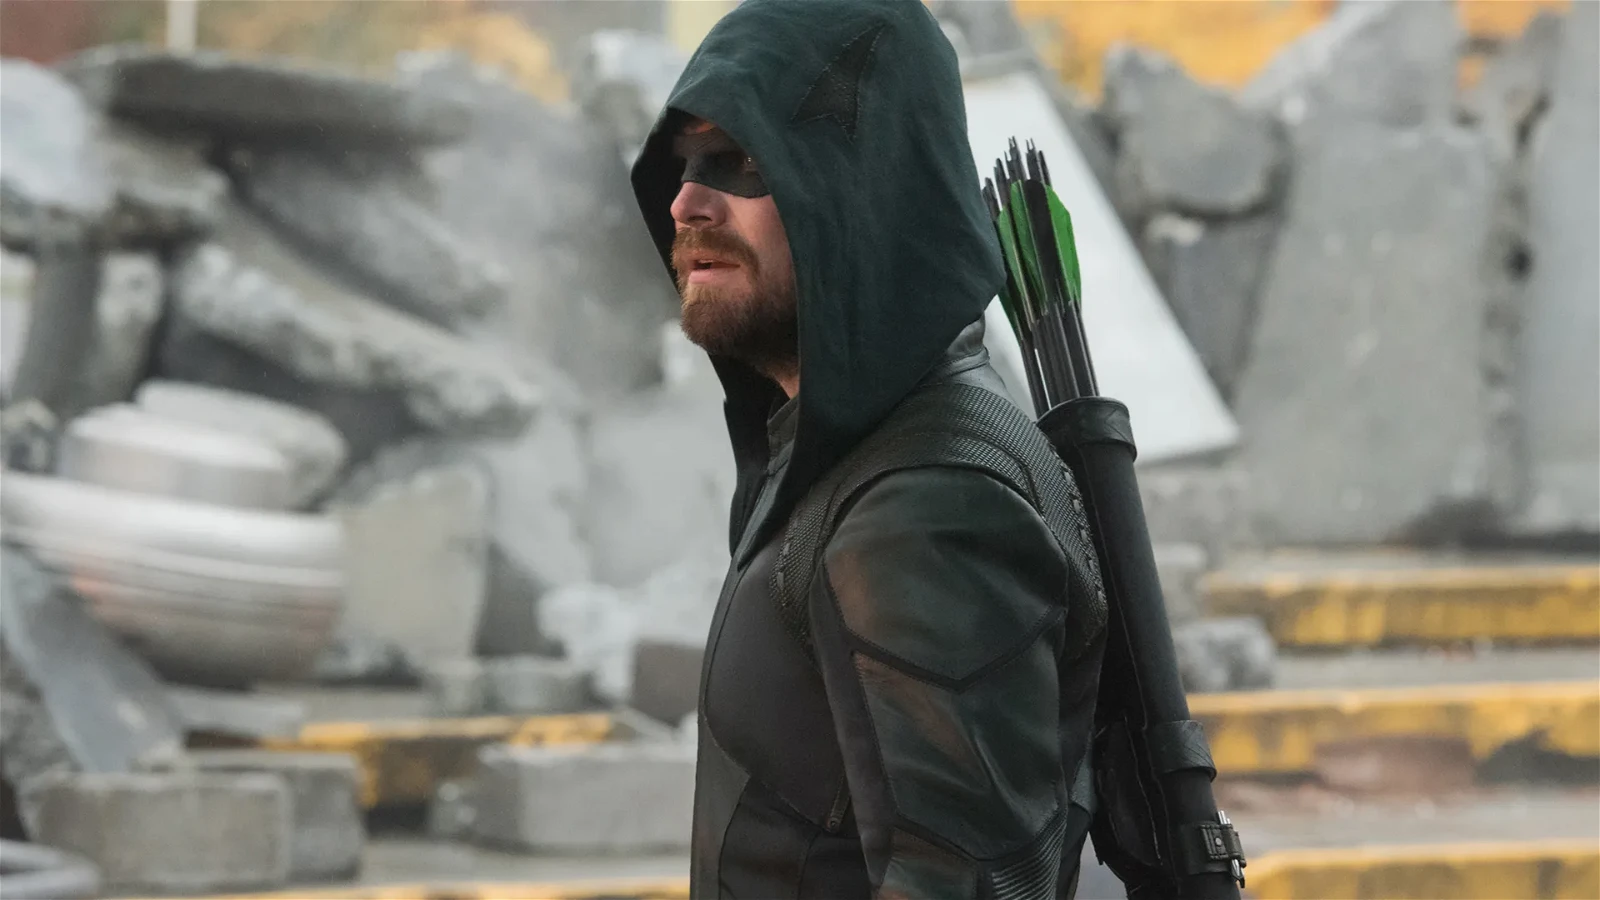 Stephen Amell dons the Green Arrow suit in Arrow